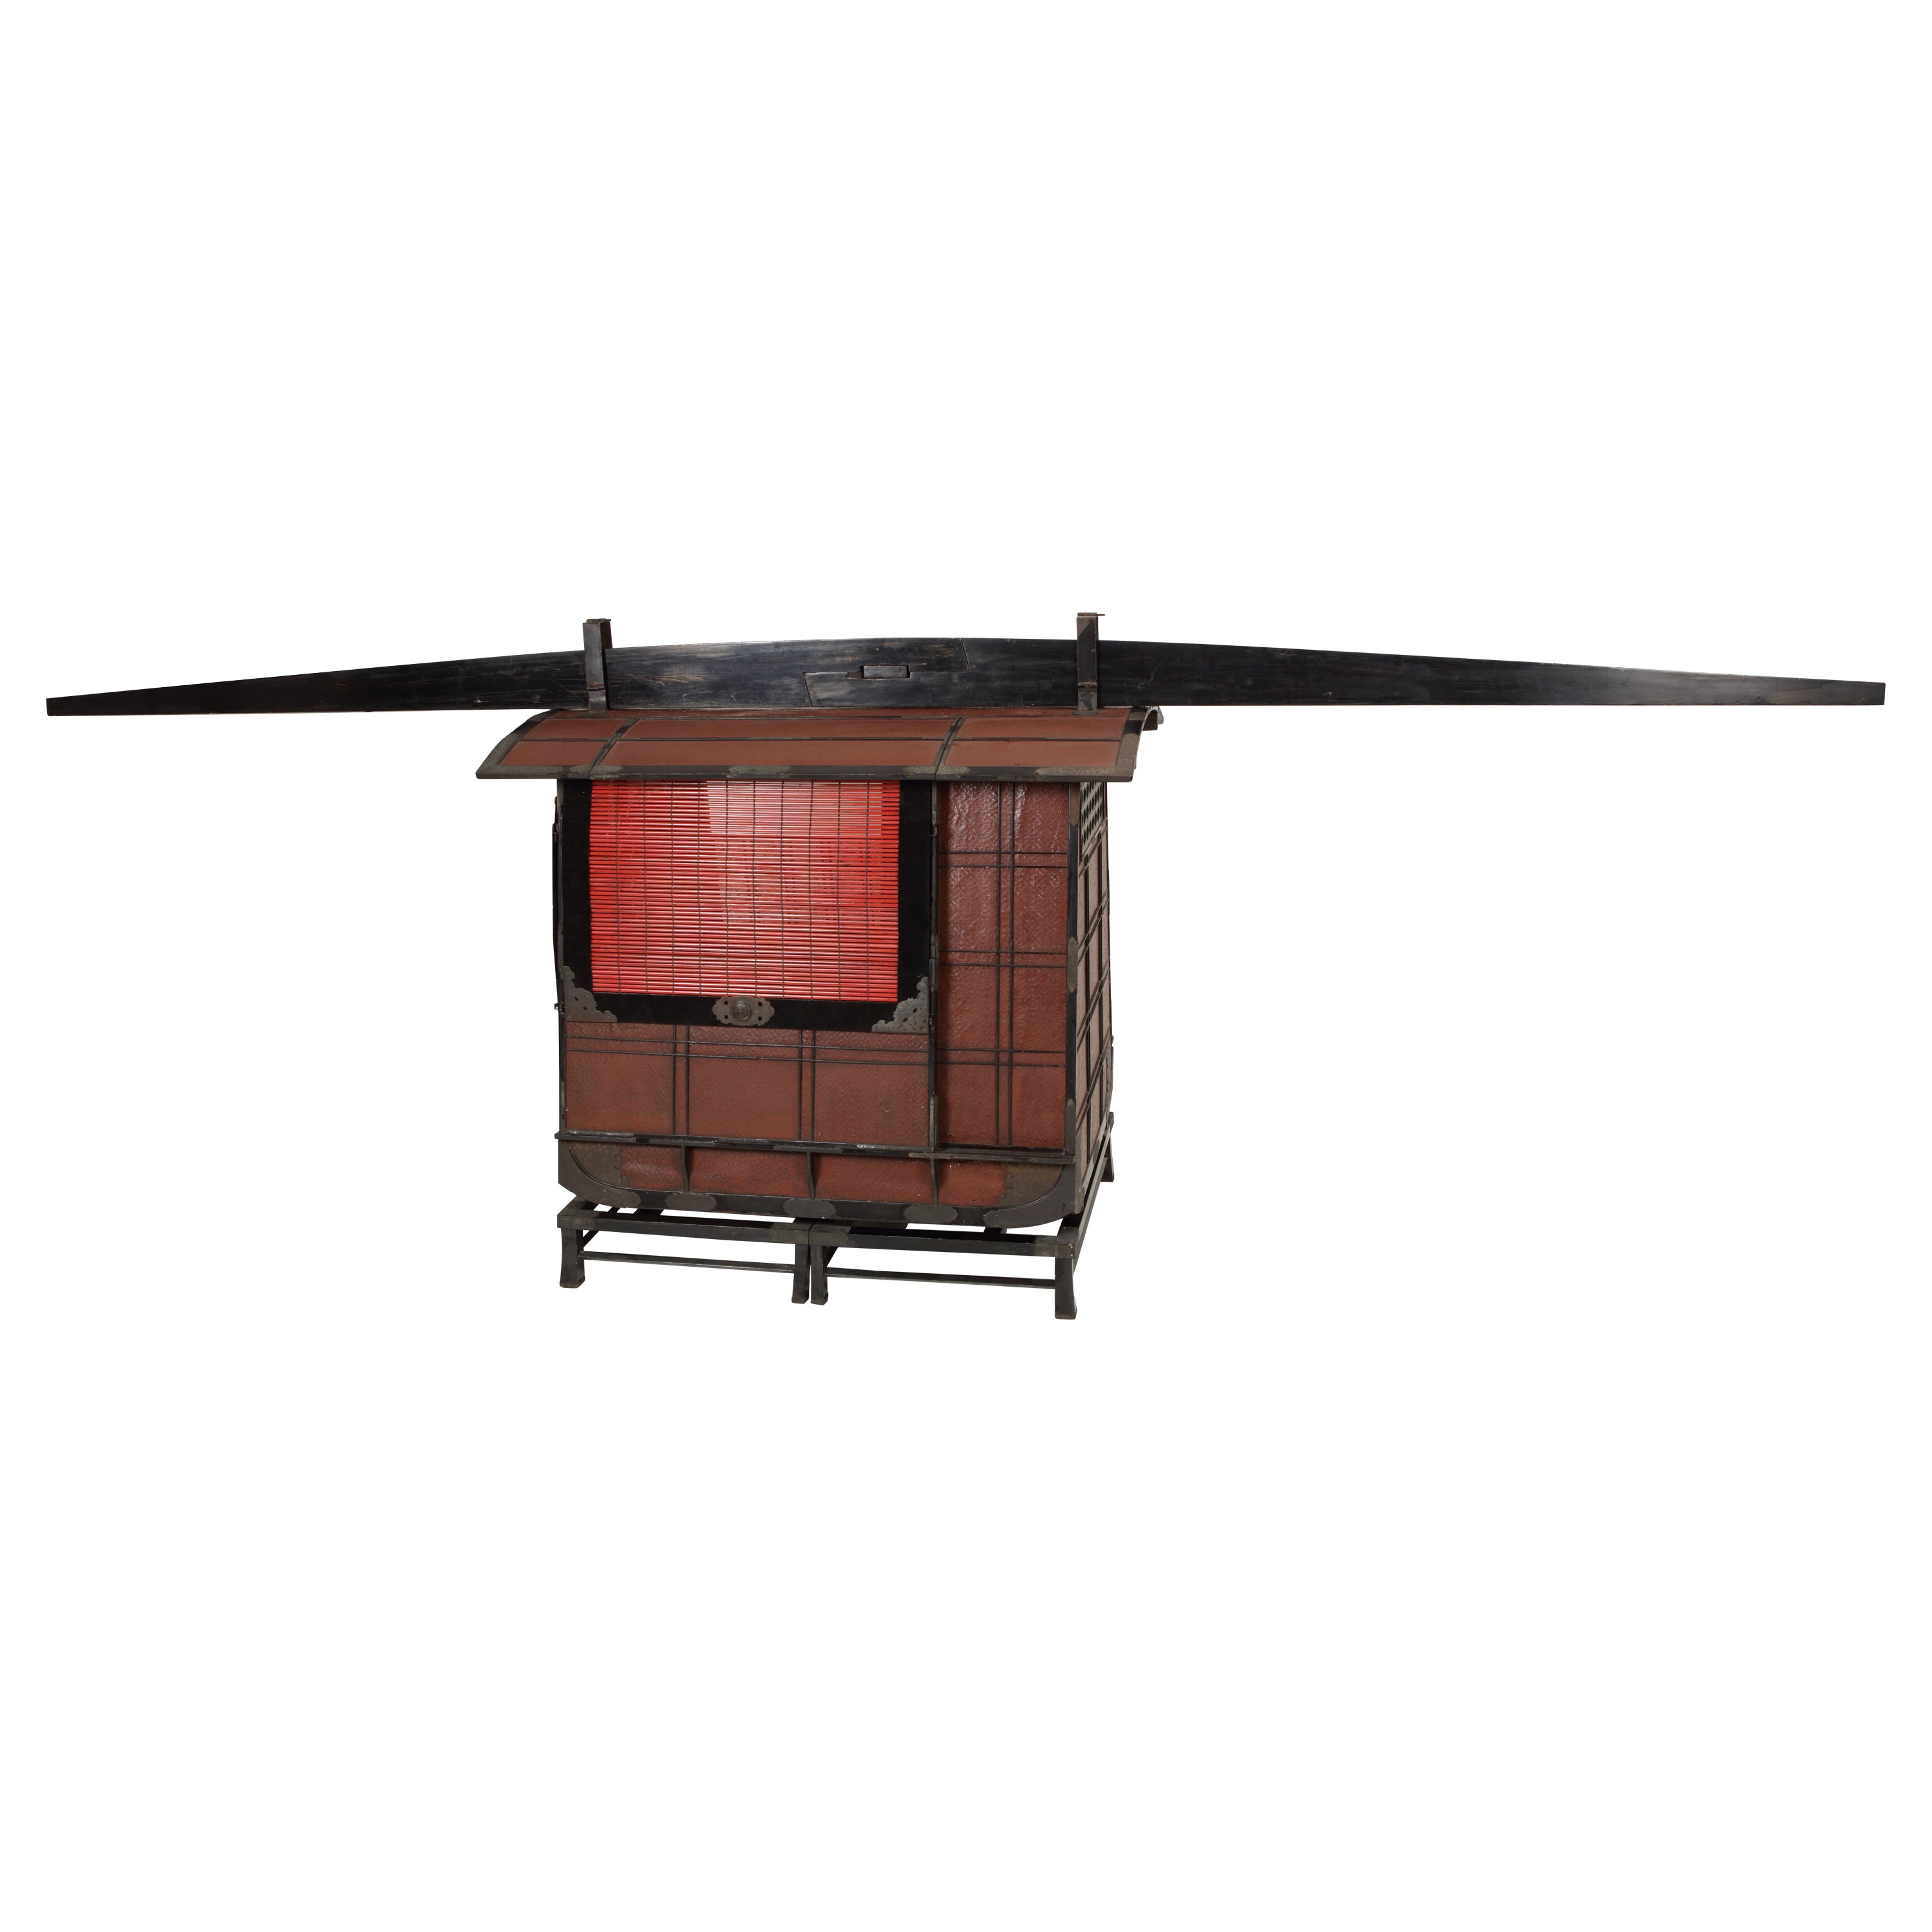 Japanese Life-Size, Edo Period, Red and Black Lacquered Palanquin or Norimono